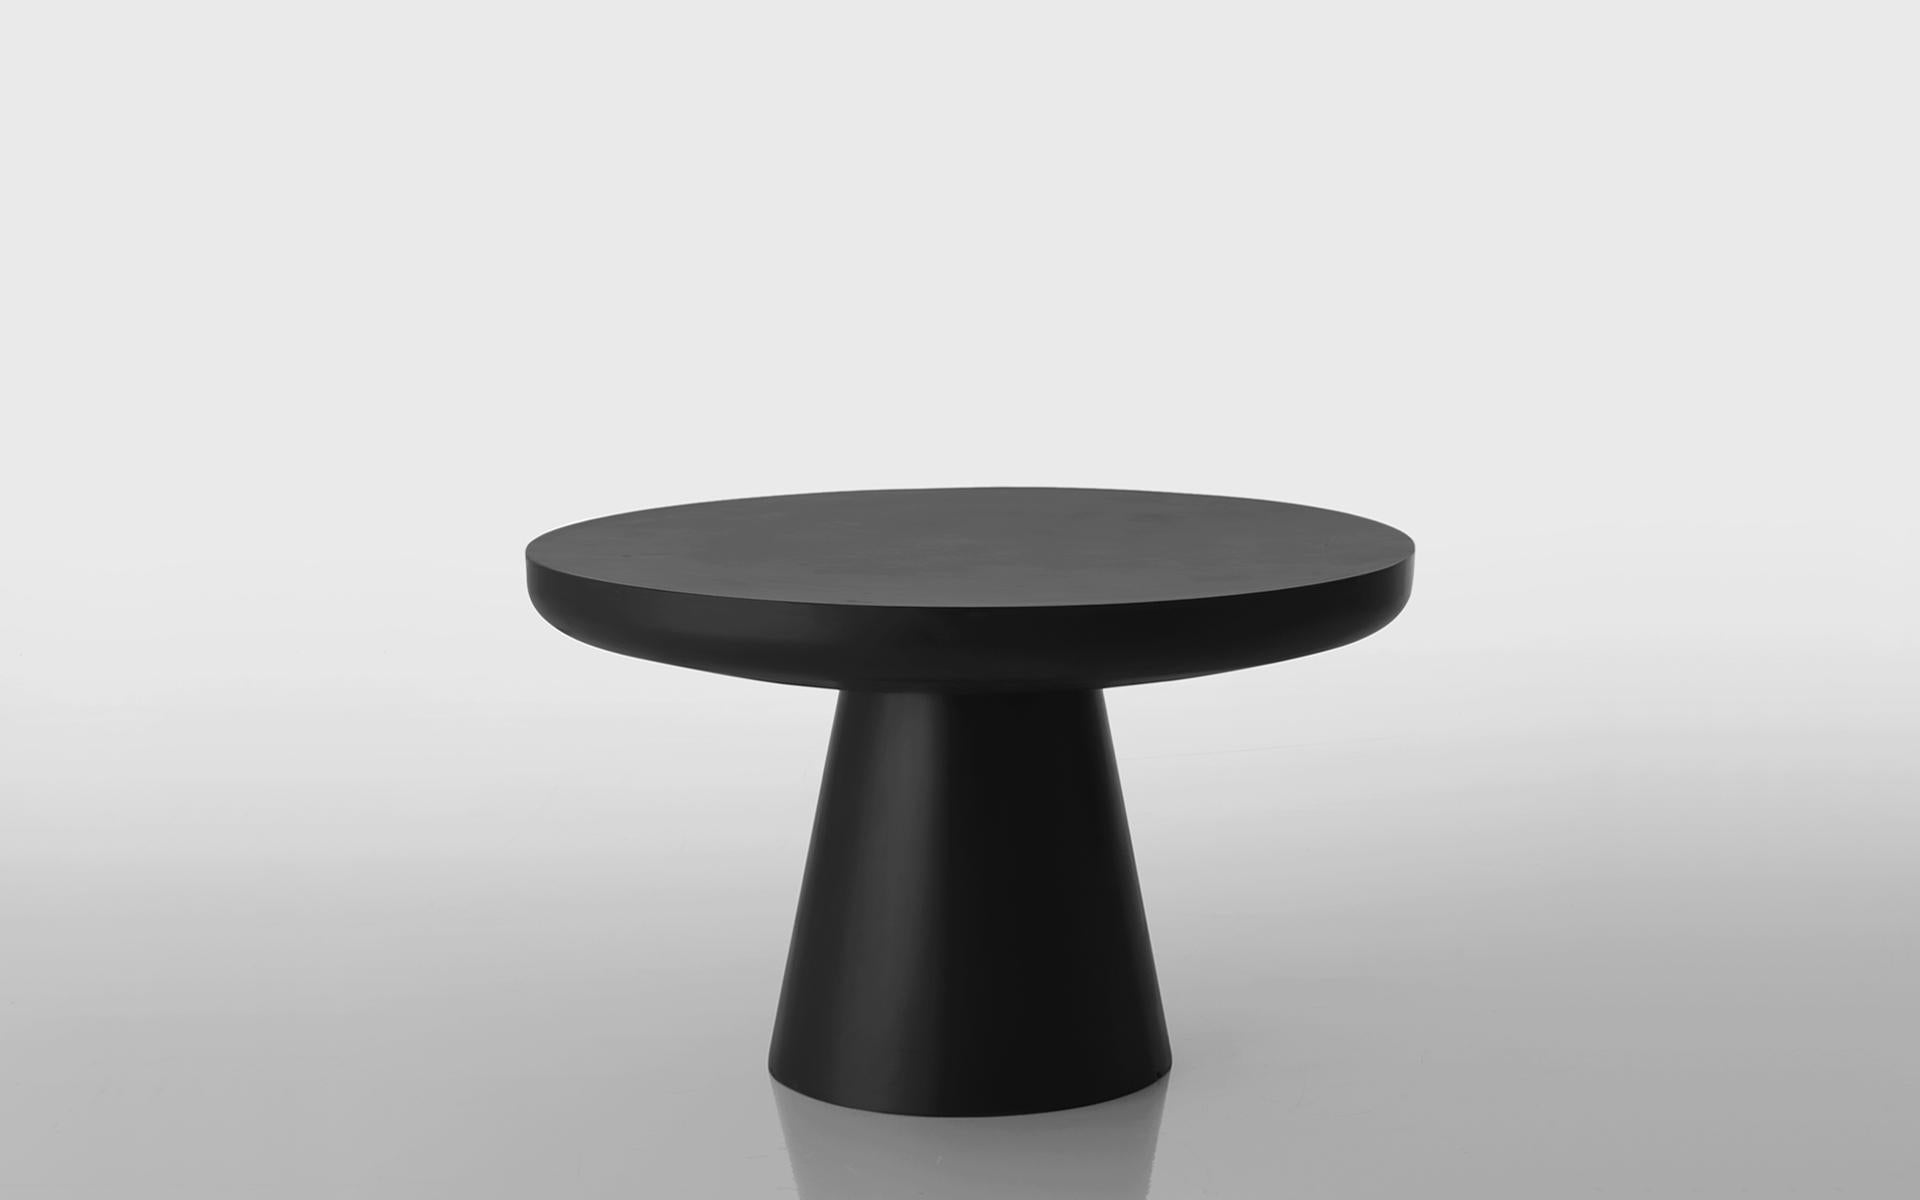 Miss table by Imperfettolab
Dimensions: Ø 84 x H 51 cm
Materials: Fiberglass

Imperfetto Lab
Who we are ? We are a family.
Verter Turroni, Emanuela Ravelli and our children Elia, Margherita and Eusebio.
All together, we are separate parts and